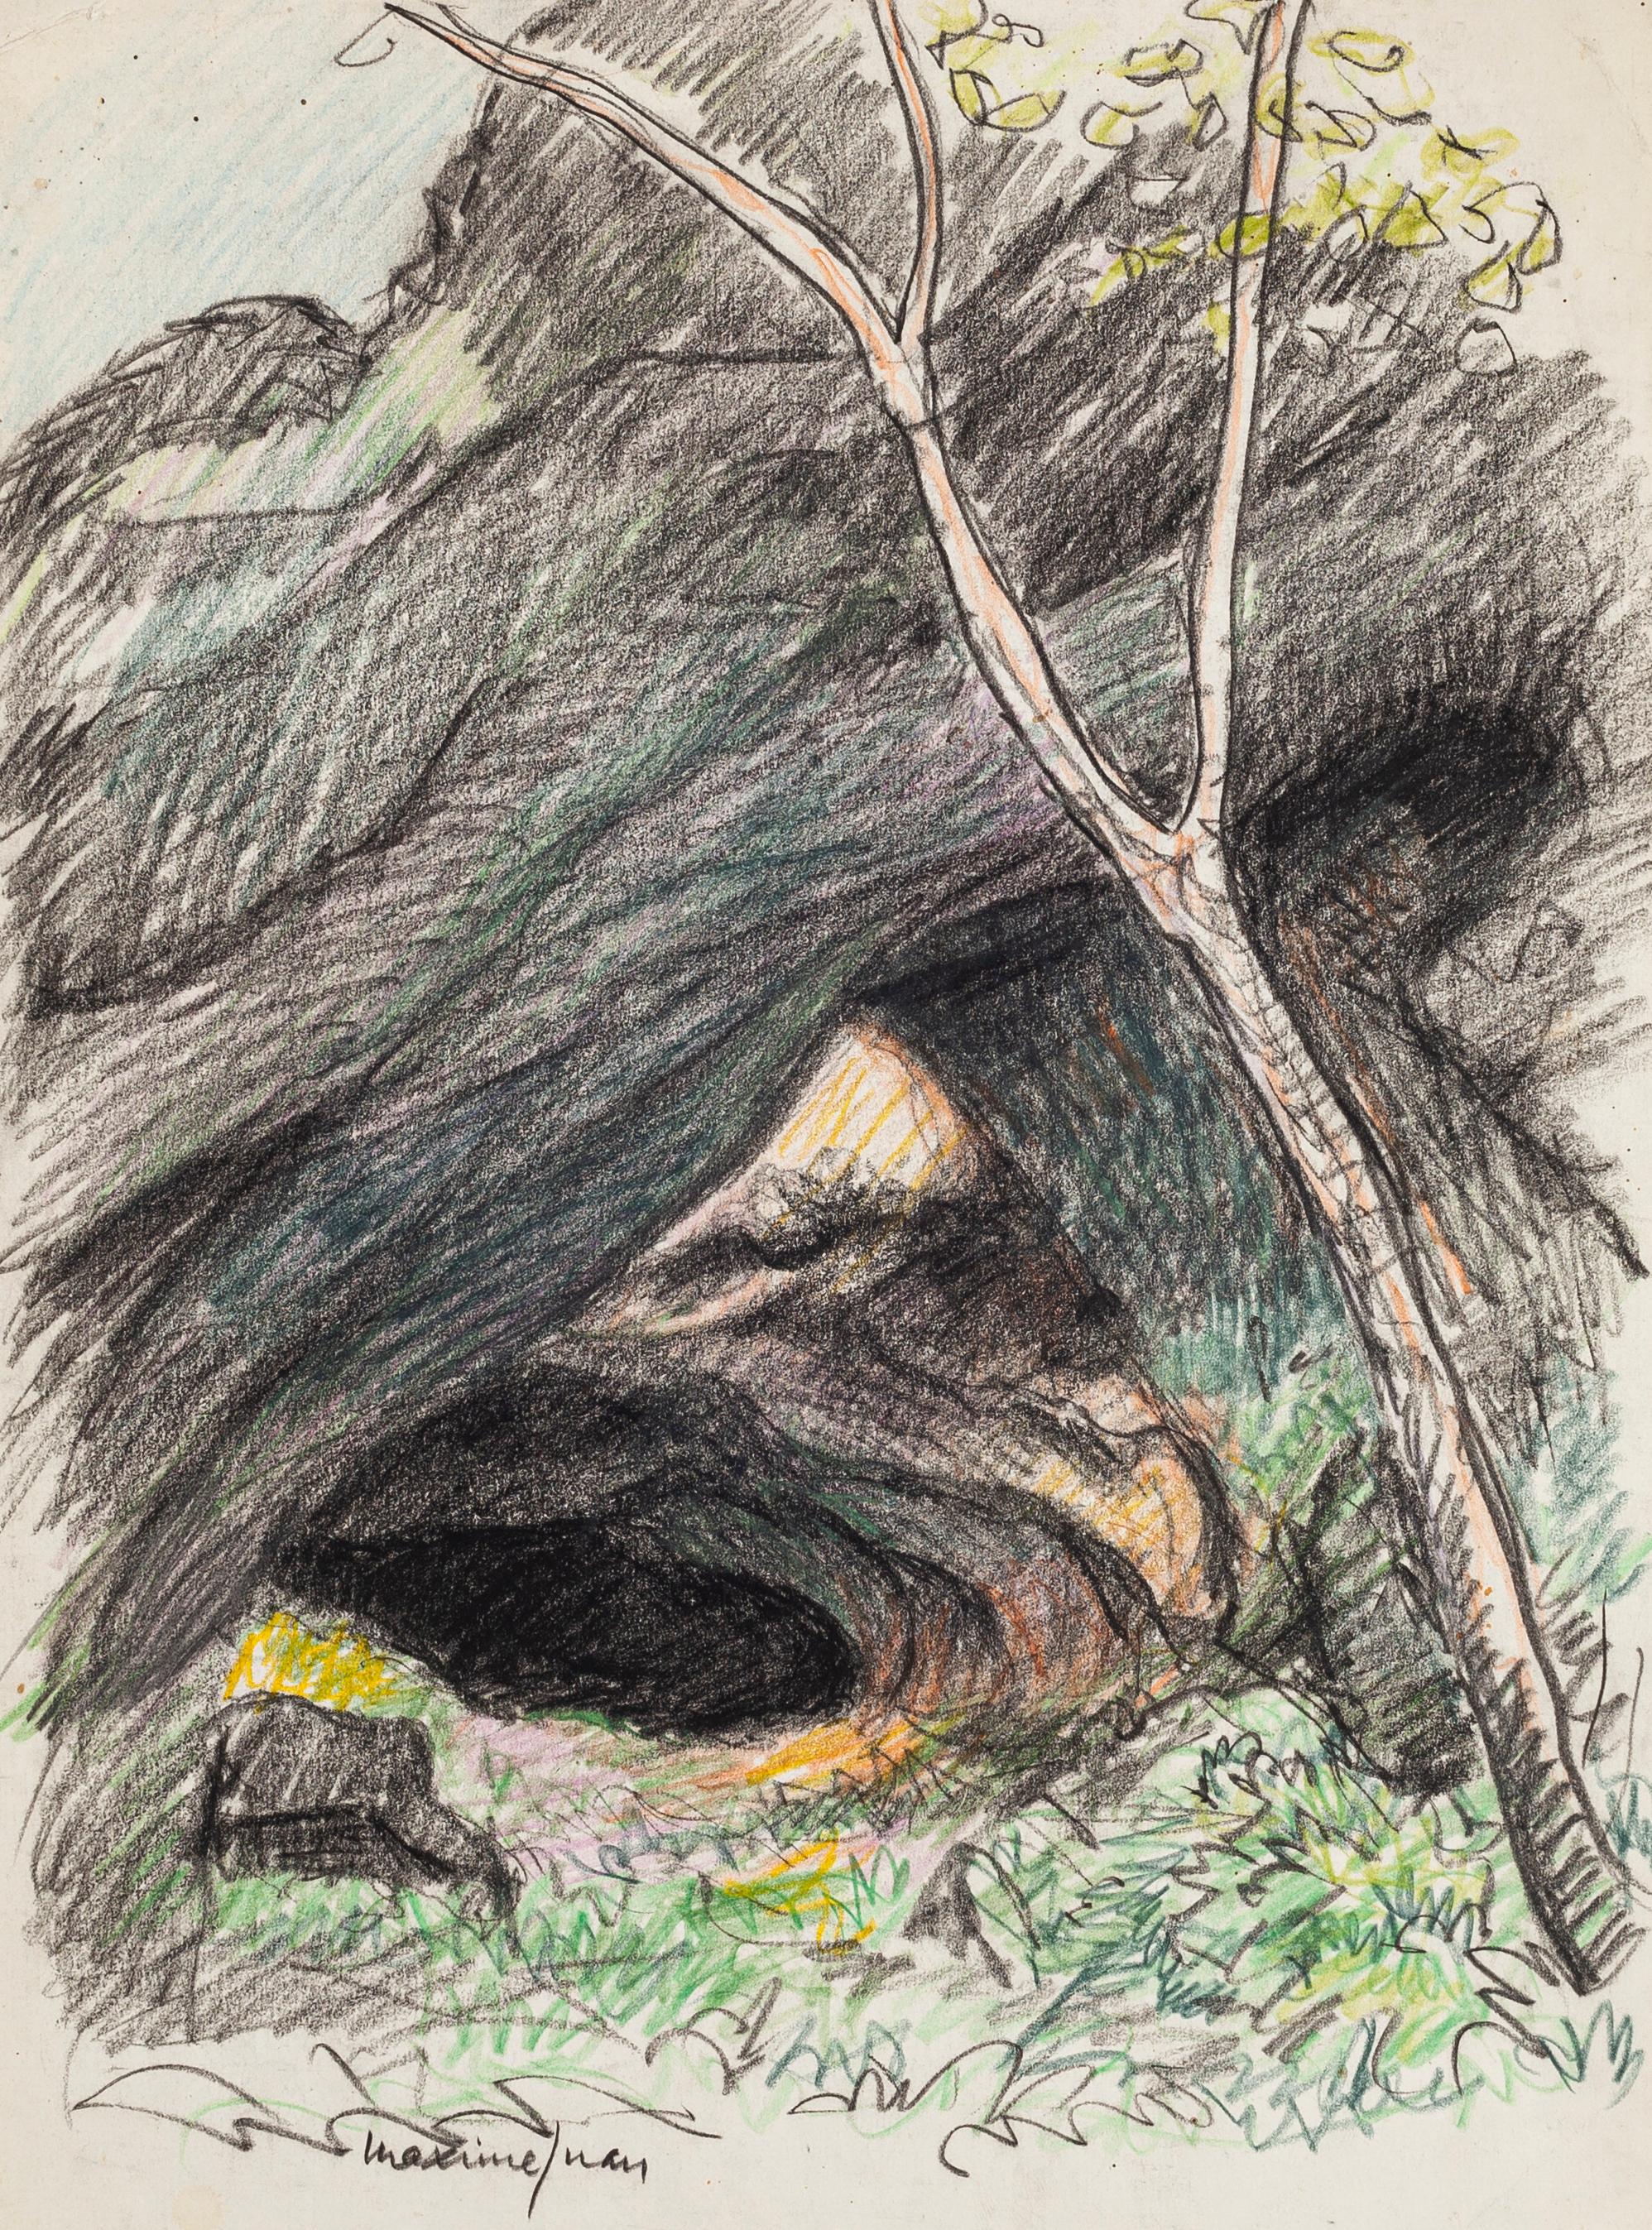 Maxime Juan Figurative Art - The Cave - Pencil and Pastel Drawing by M. Juan - Late 20th Century